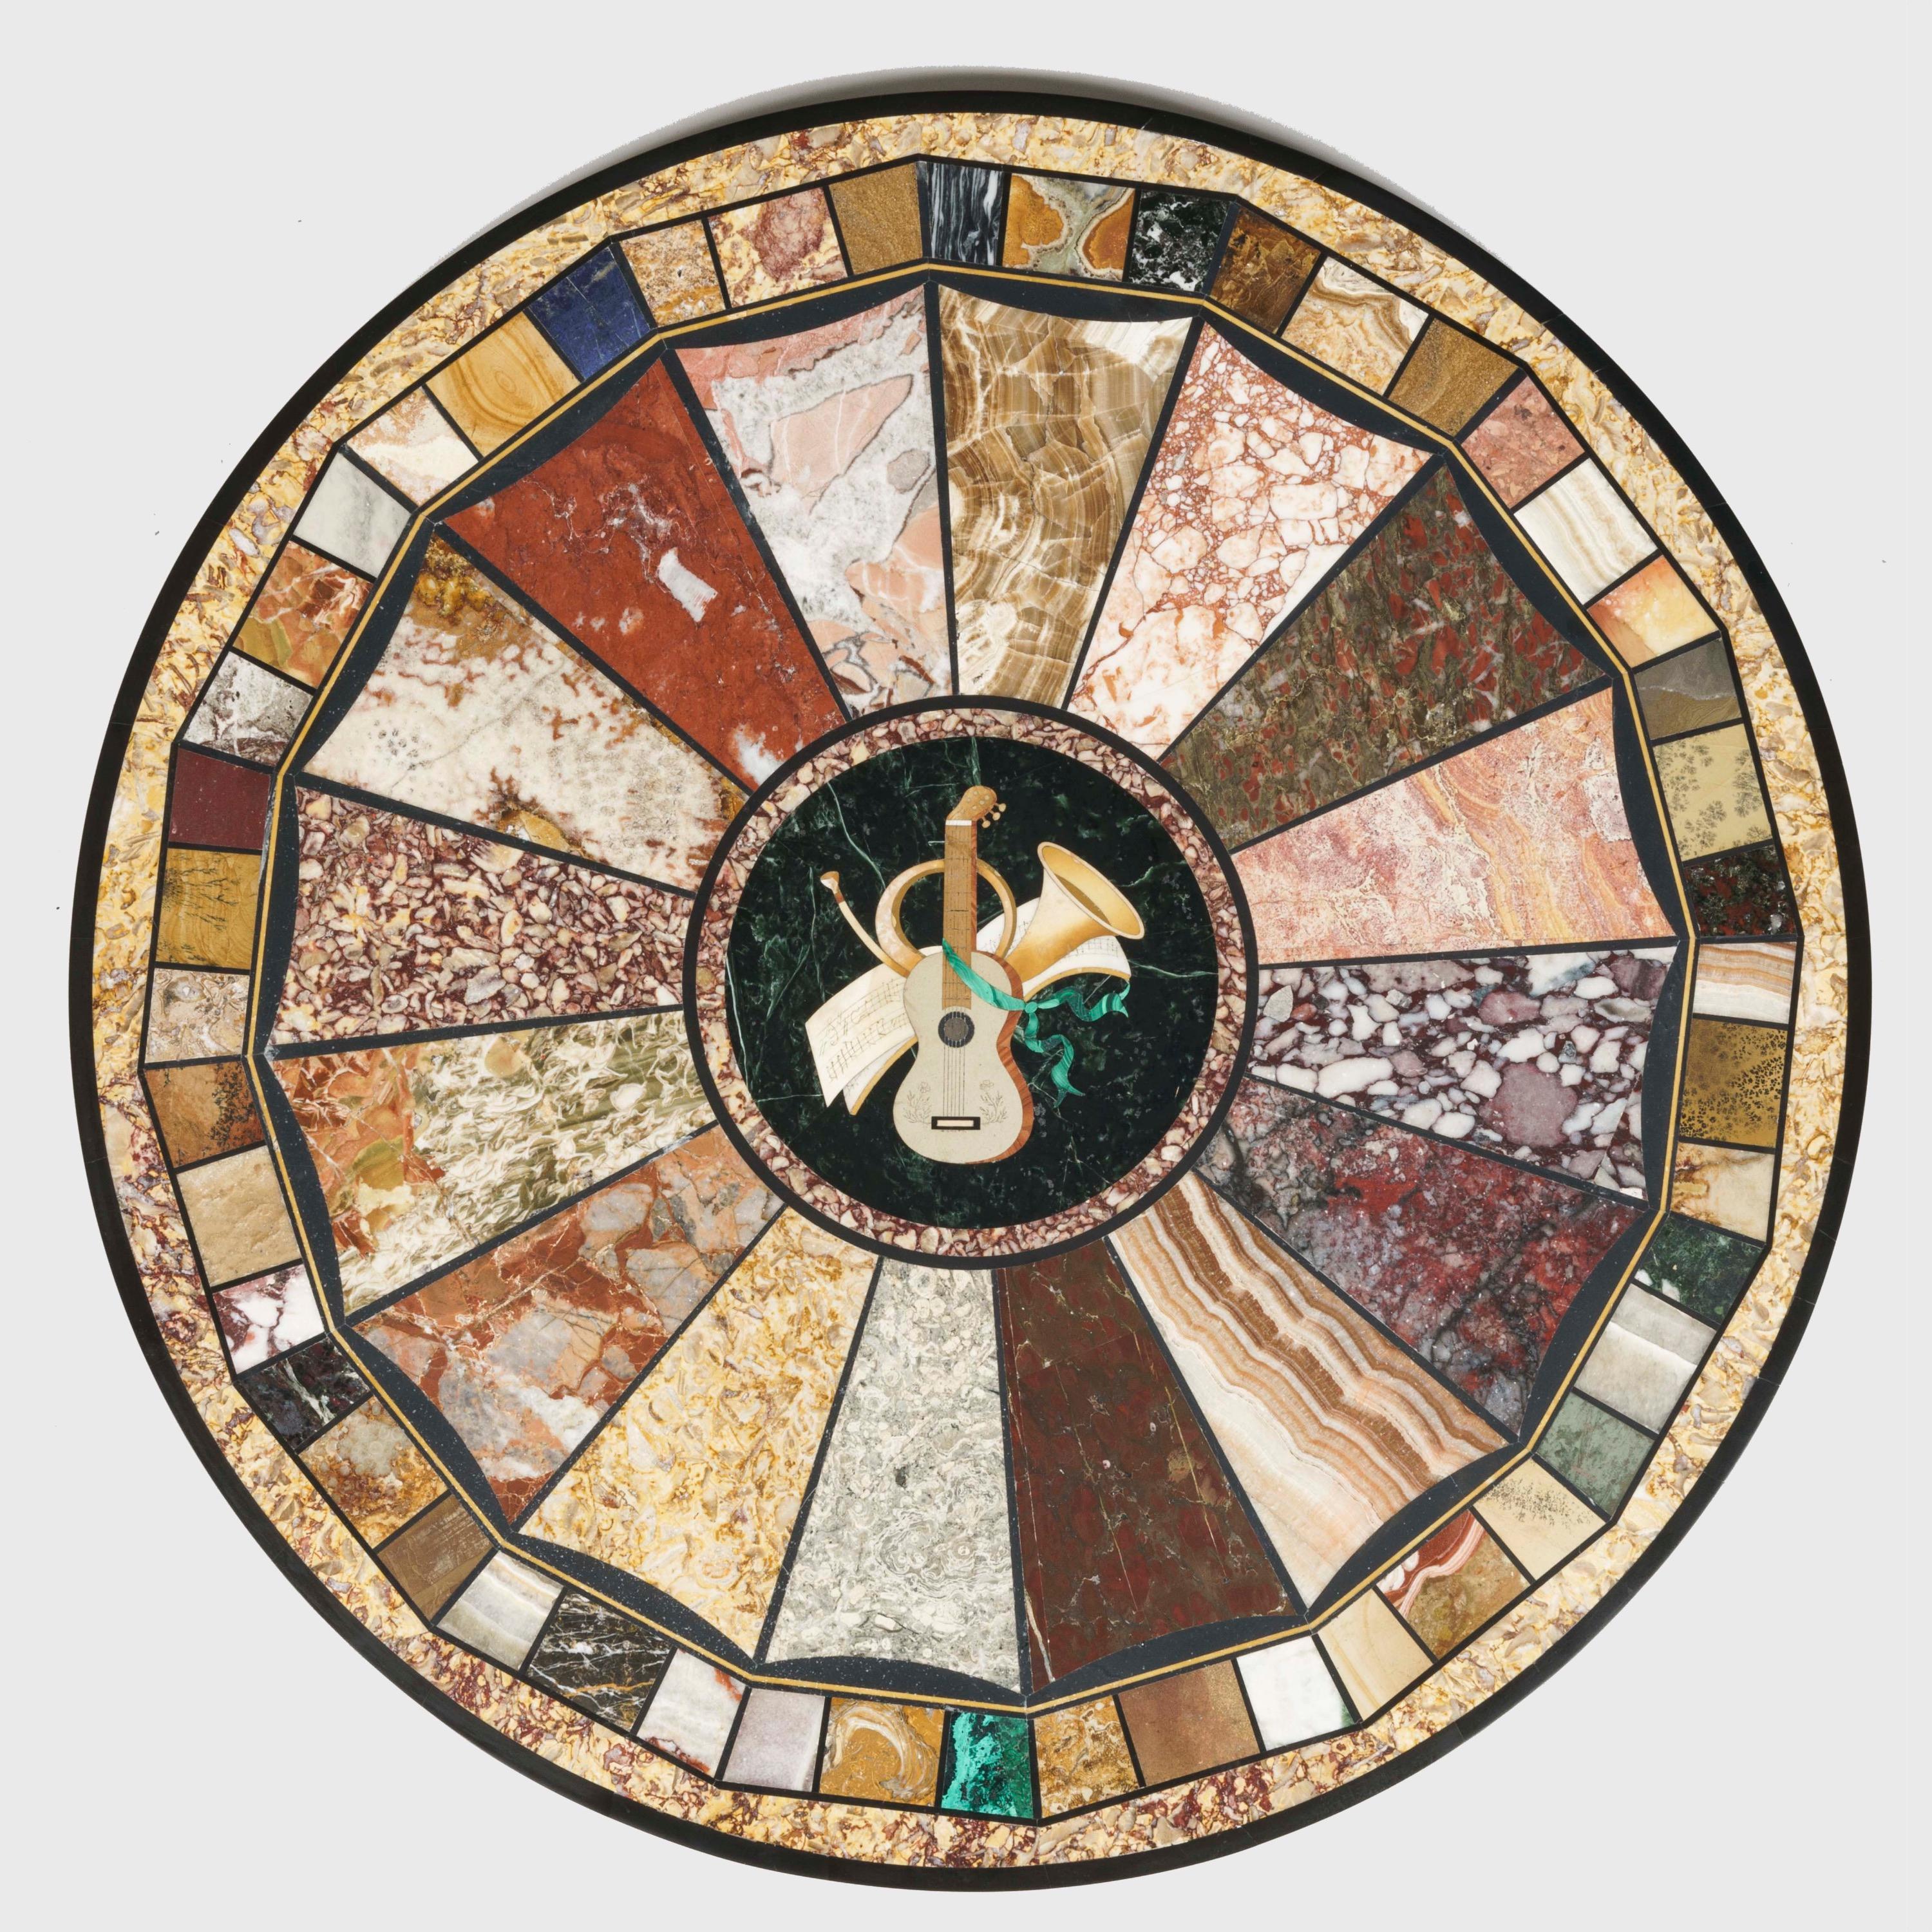 A 'Grand Tour' specimen marble top table

The circular top presenting a geometric mosaic design with a central musical cartouche executed in pietre dure, surrounded by 16 lobed radial wedges and an inlaid border of 48 unique marbles, for a total